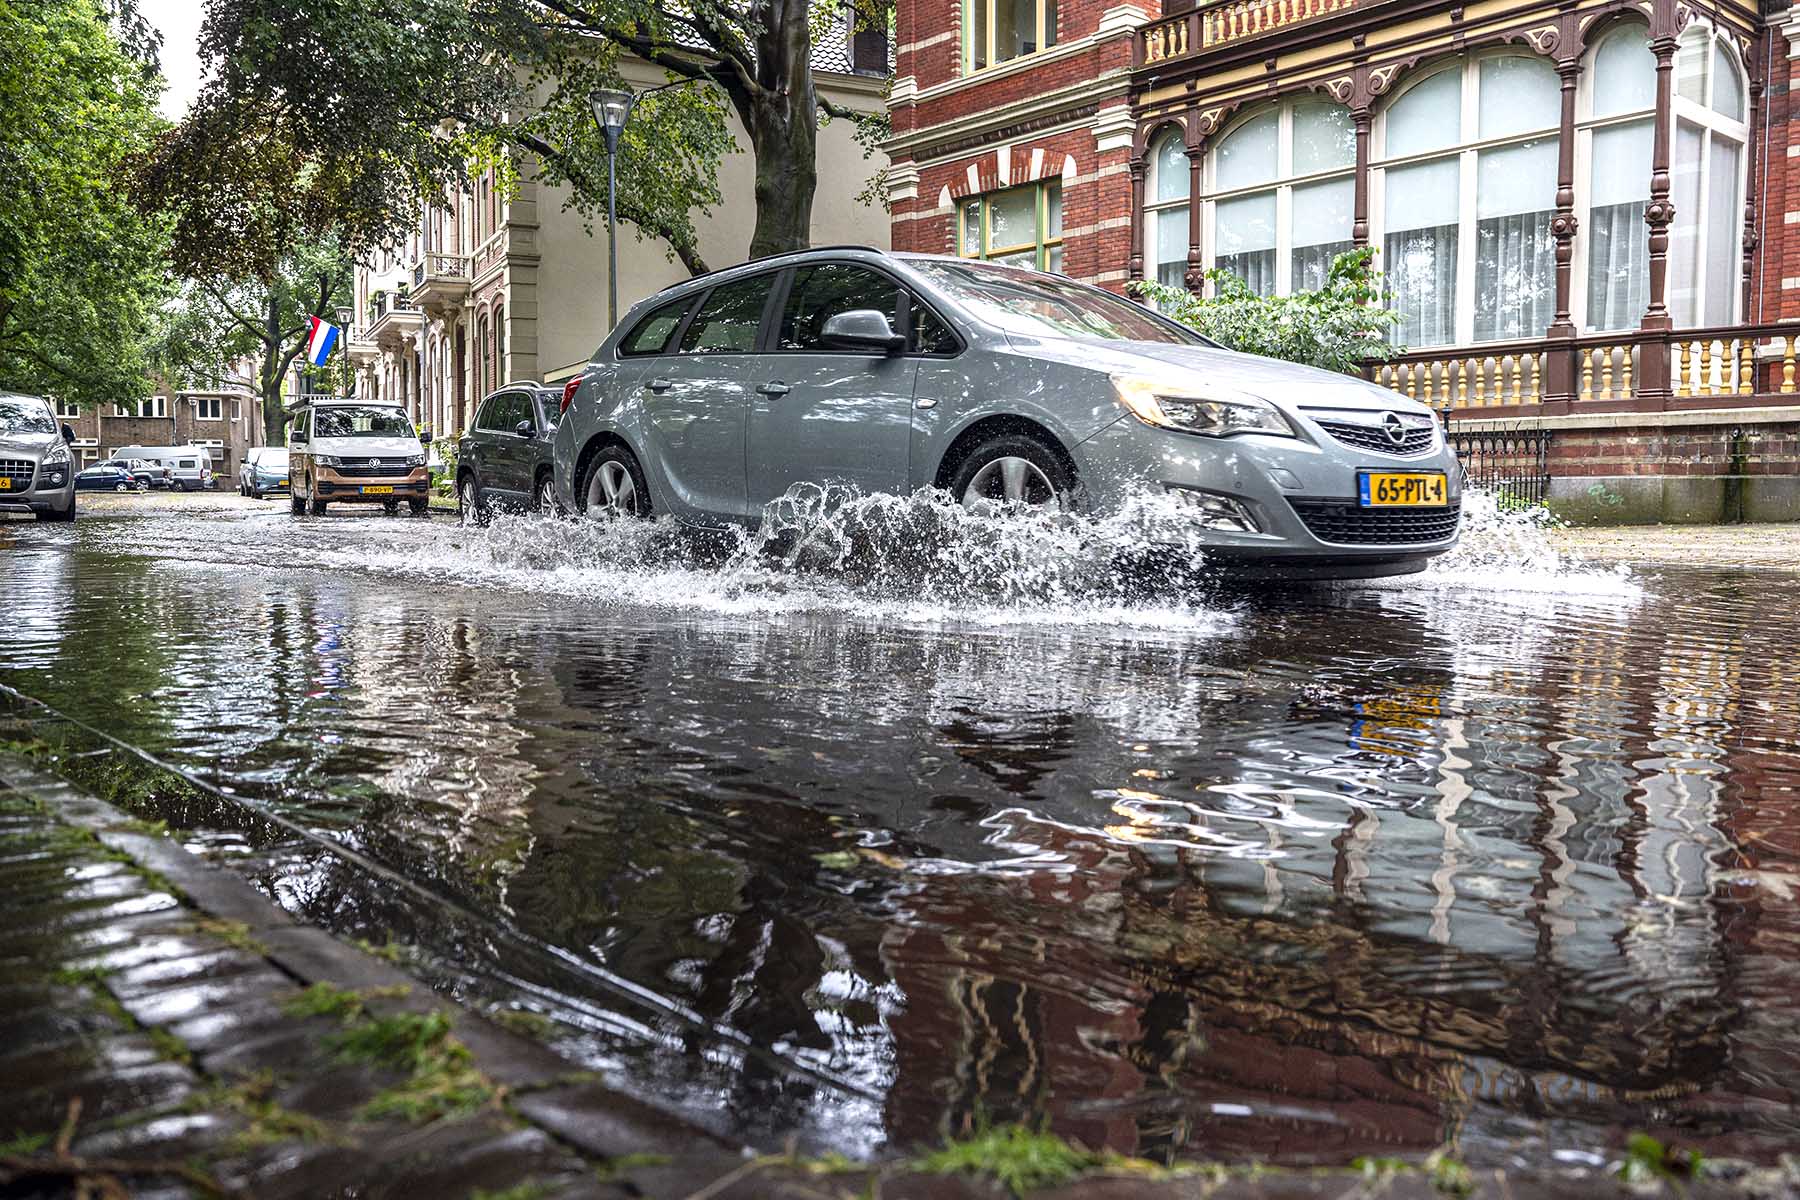 A silver car is driving through a flooded street in Zwolle, the Netherlands.